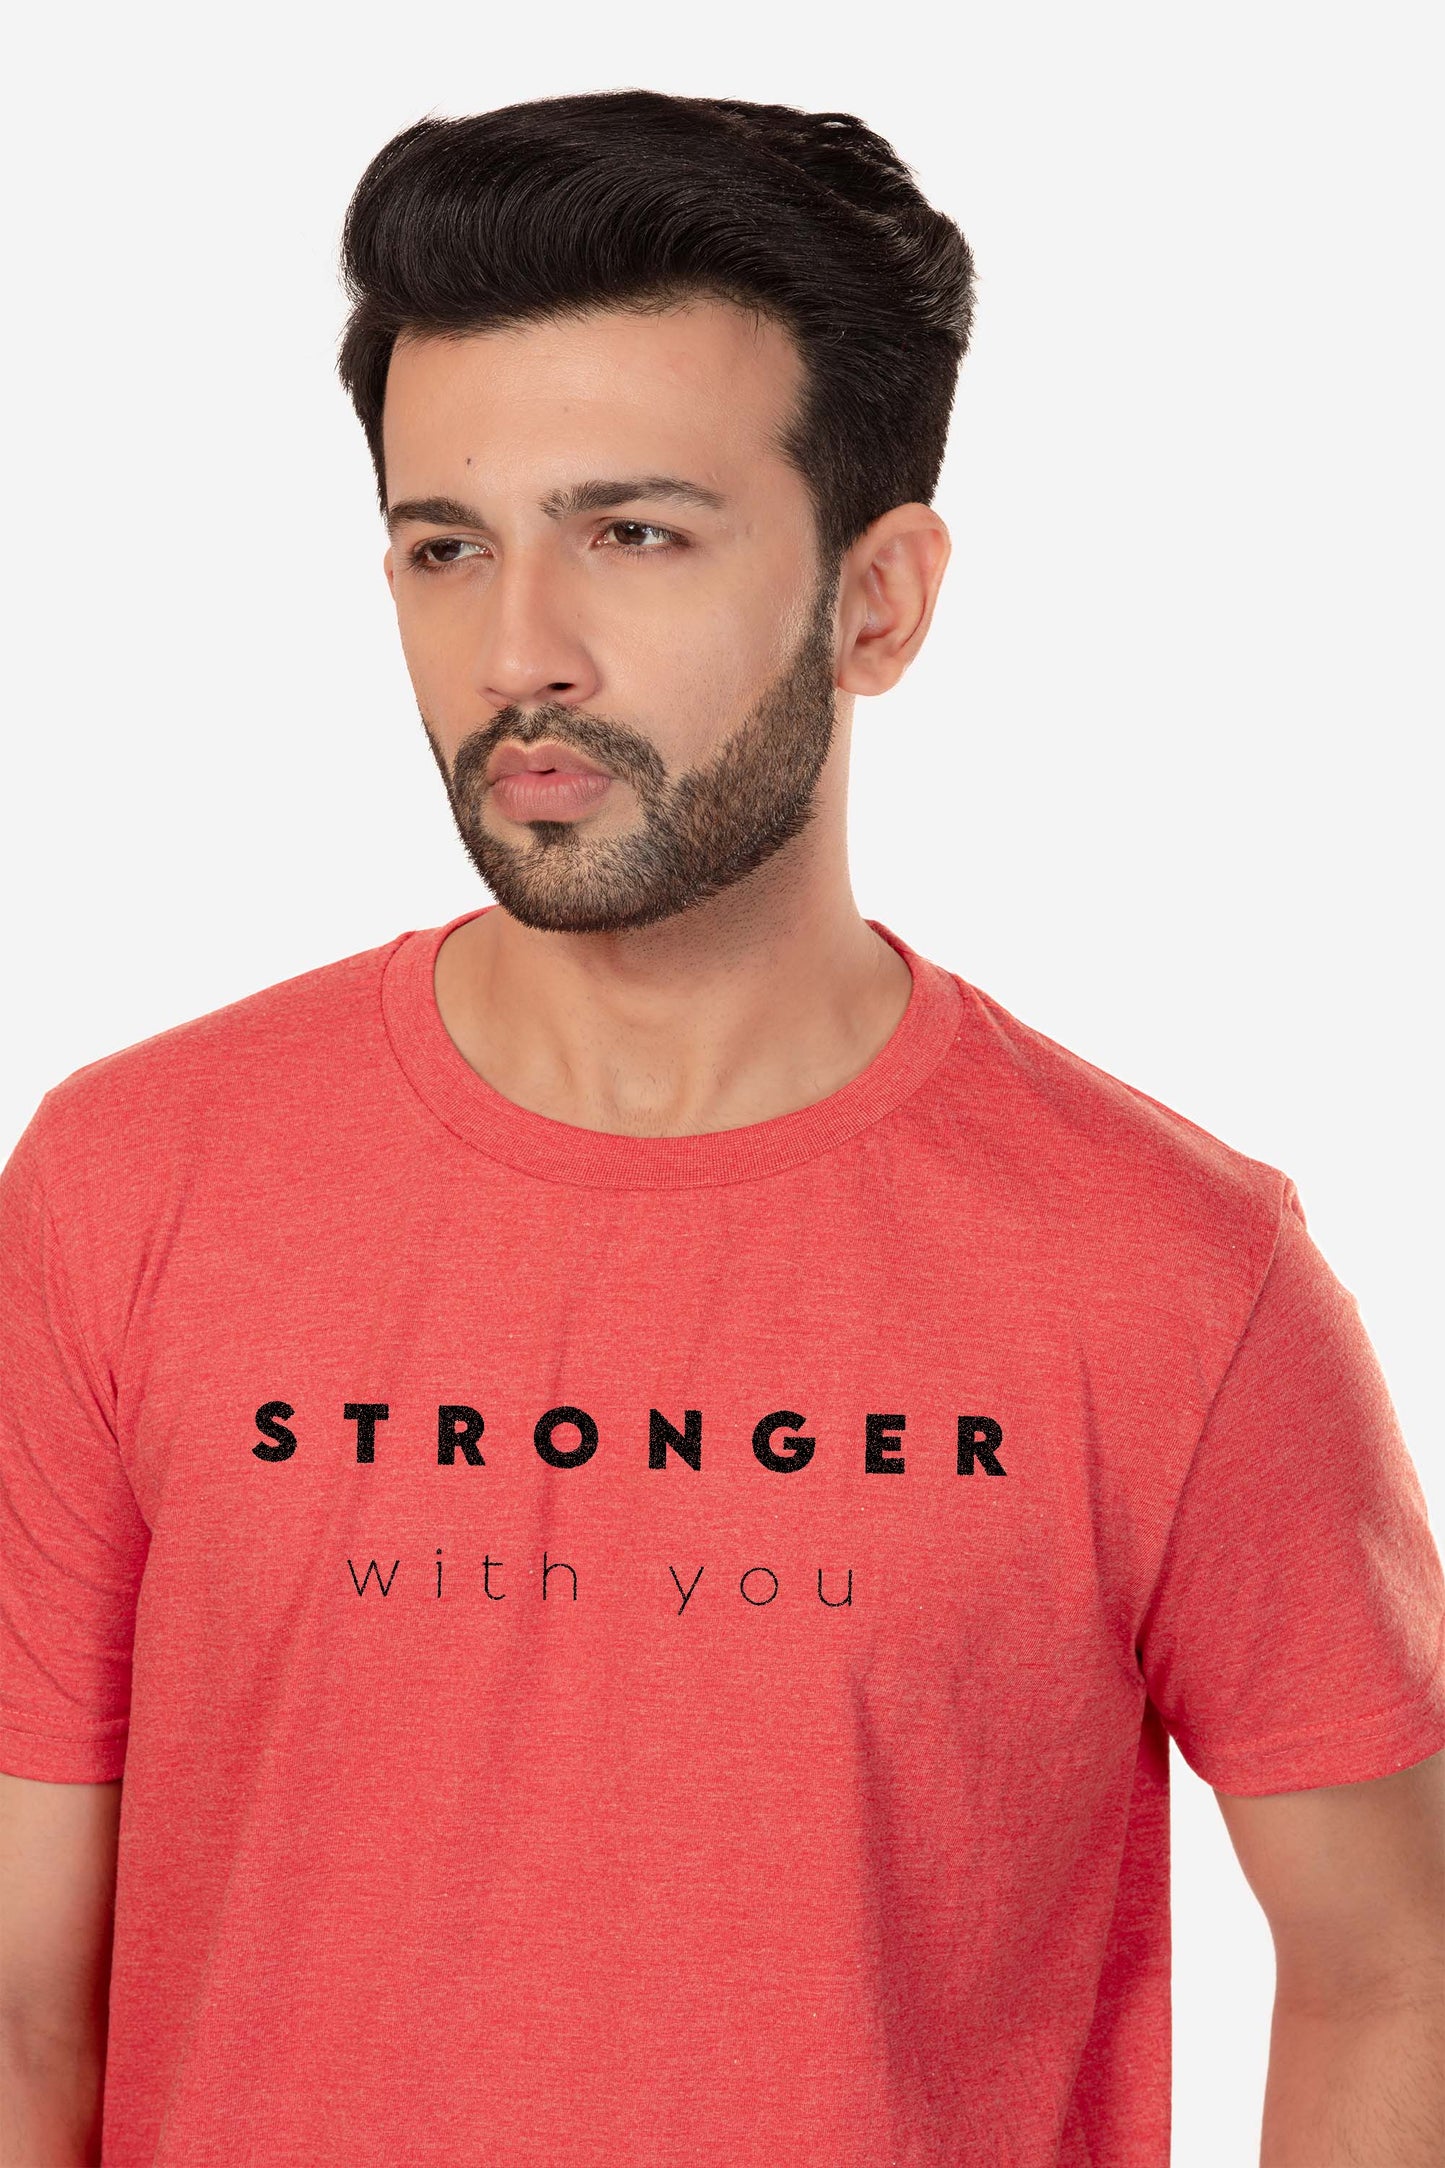 Stronger with you - Melange Cotton T-shirt - keos.life